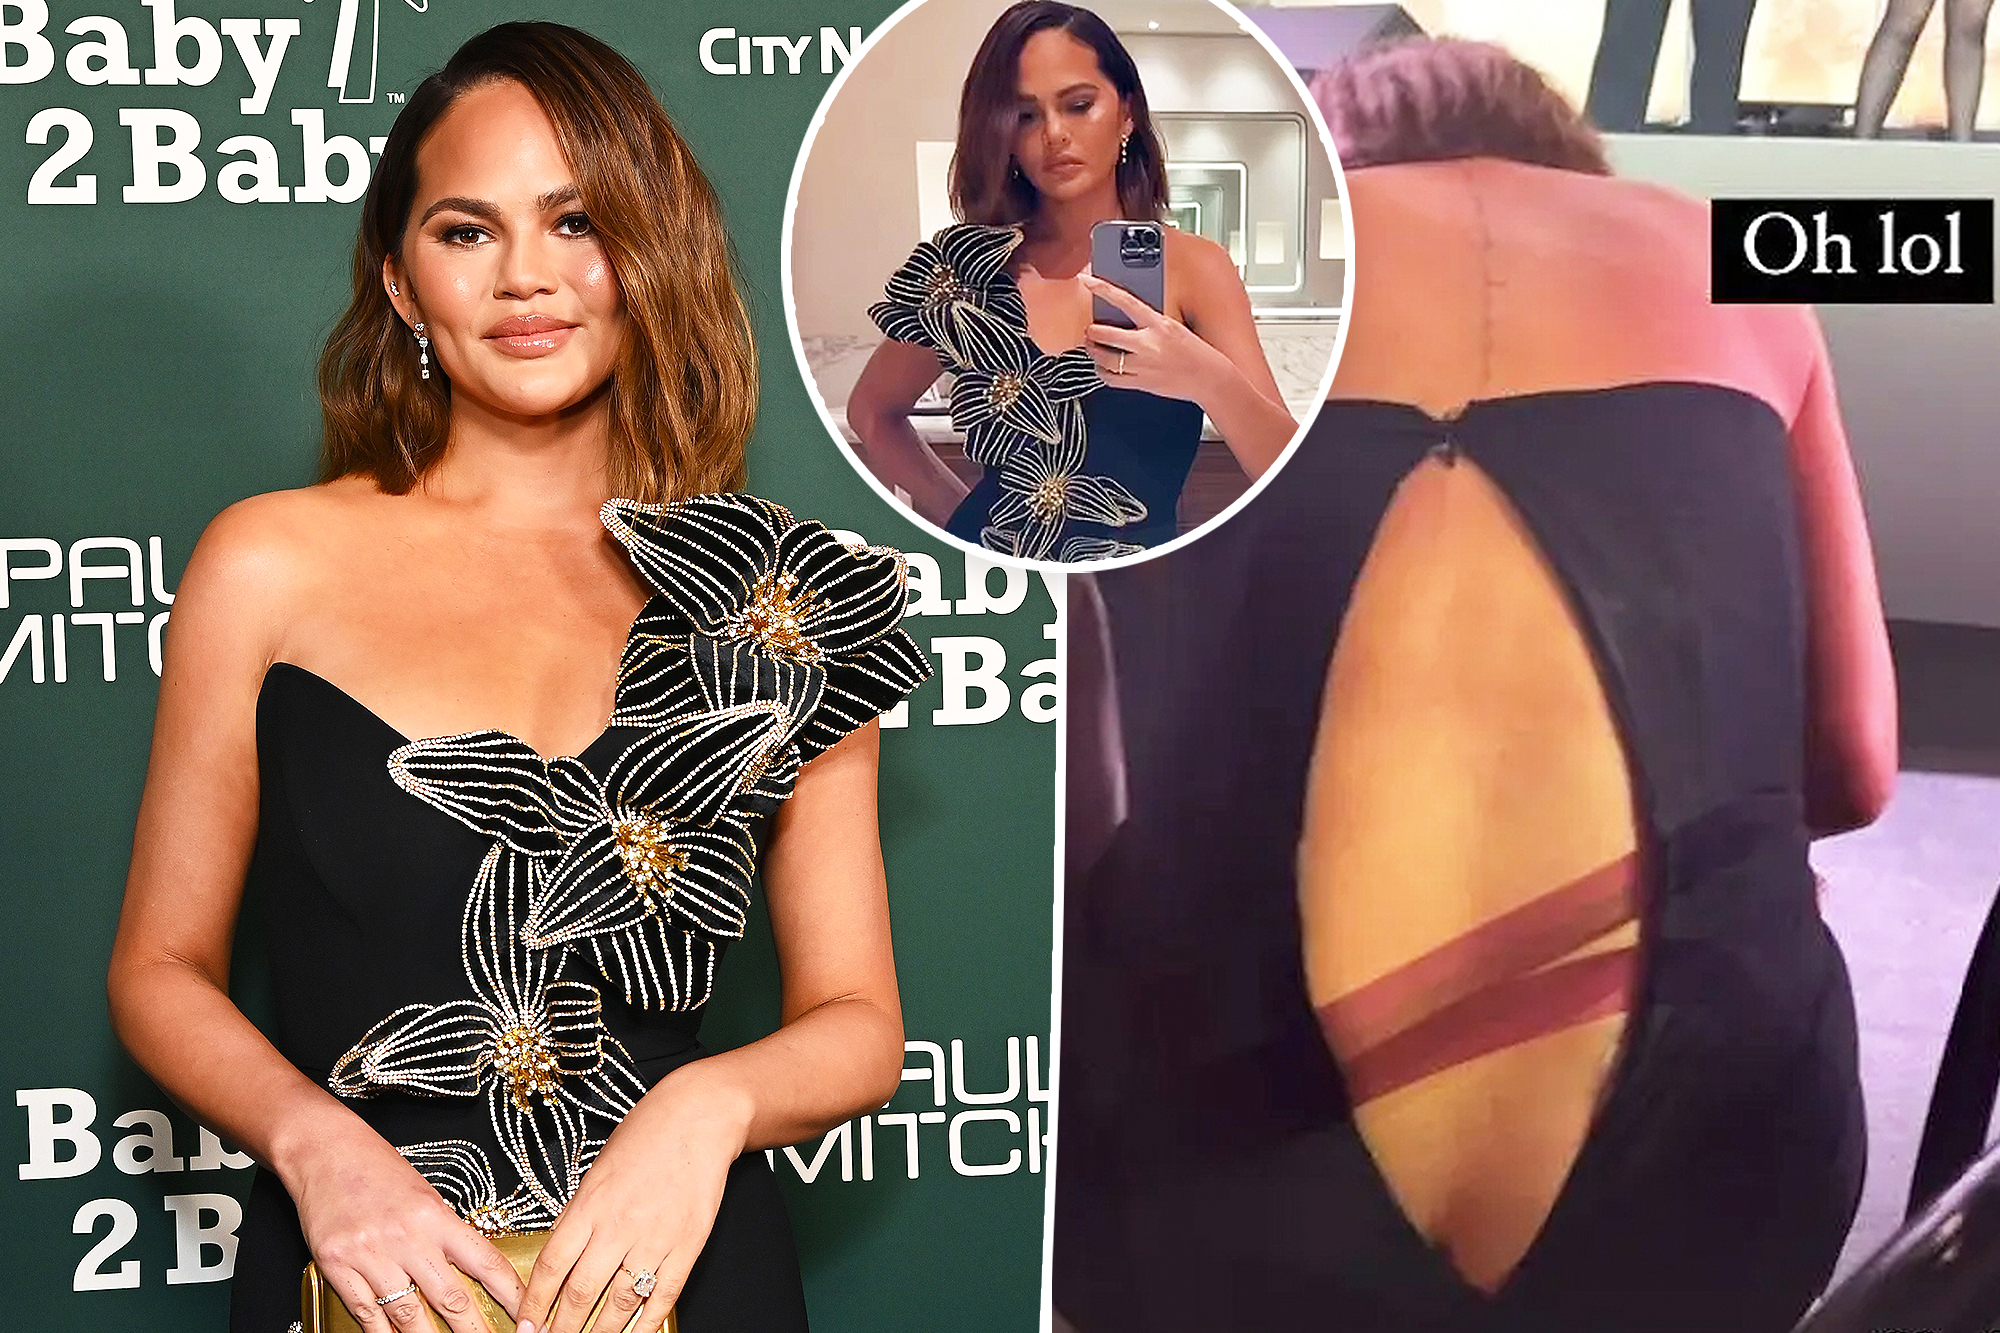 abby dion recommends chrissy teigen wardrobe malfunction uncensored photos pic